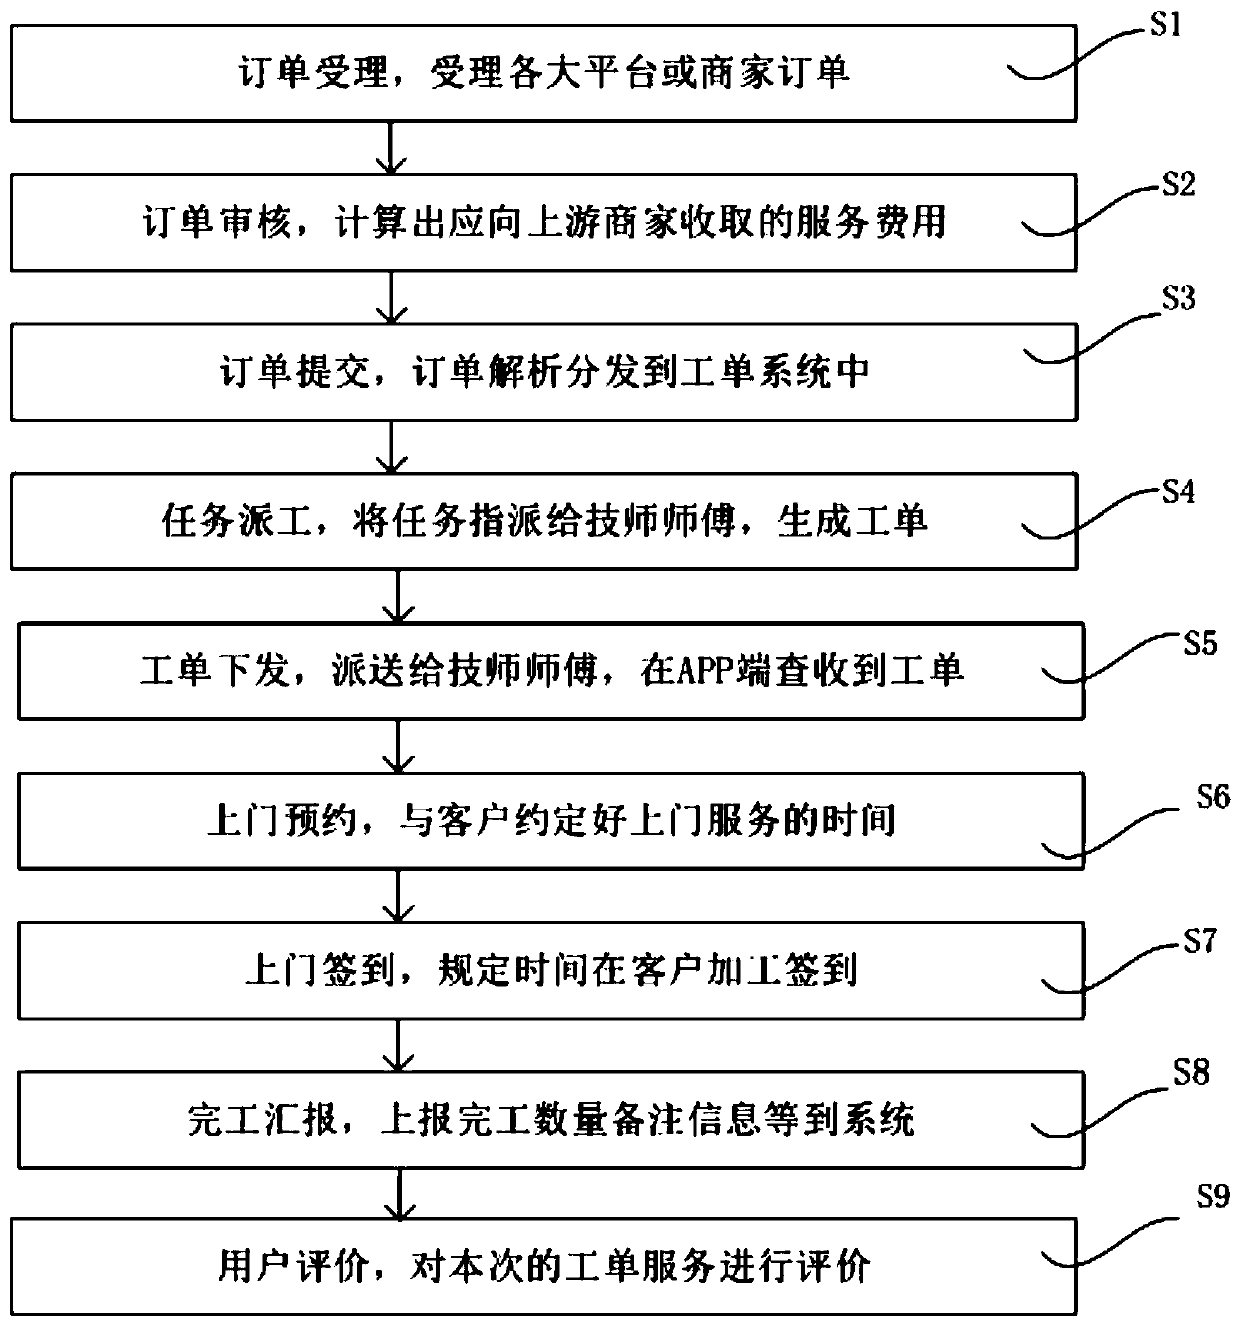 Door-to-door service automatic order arrangement system and order tracking system